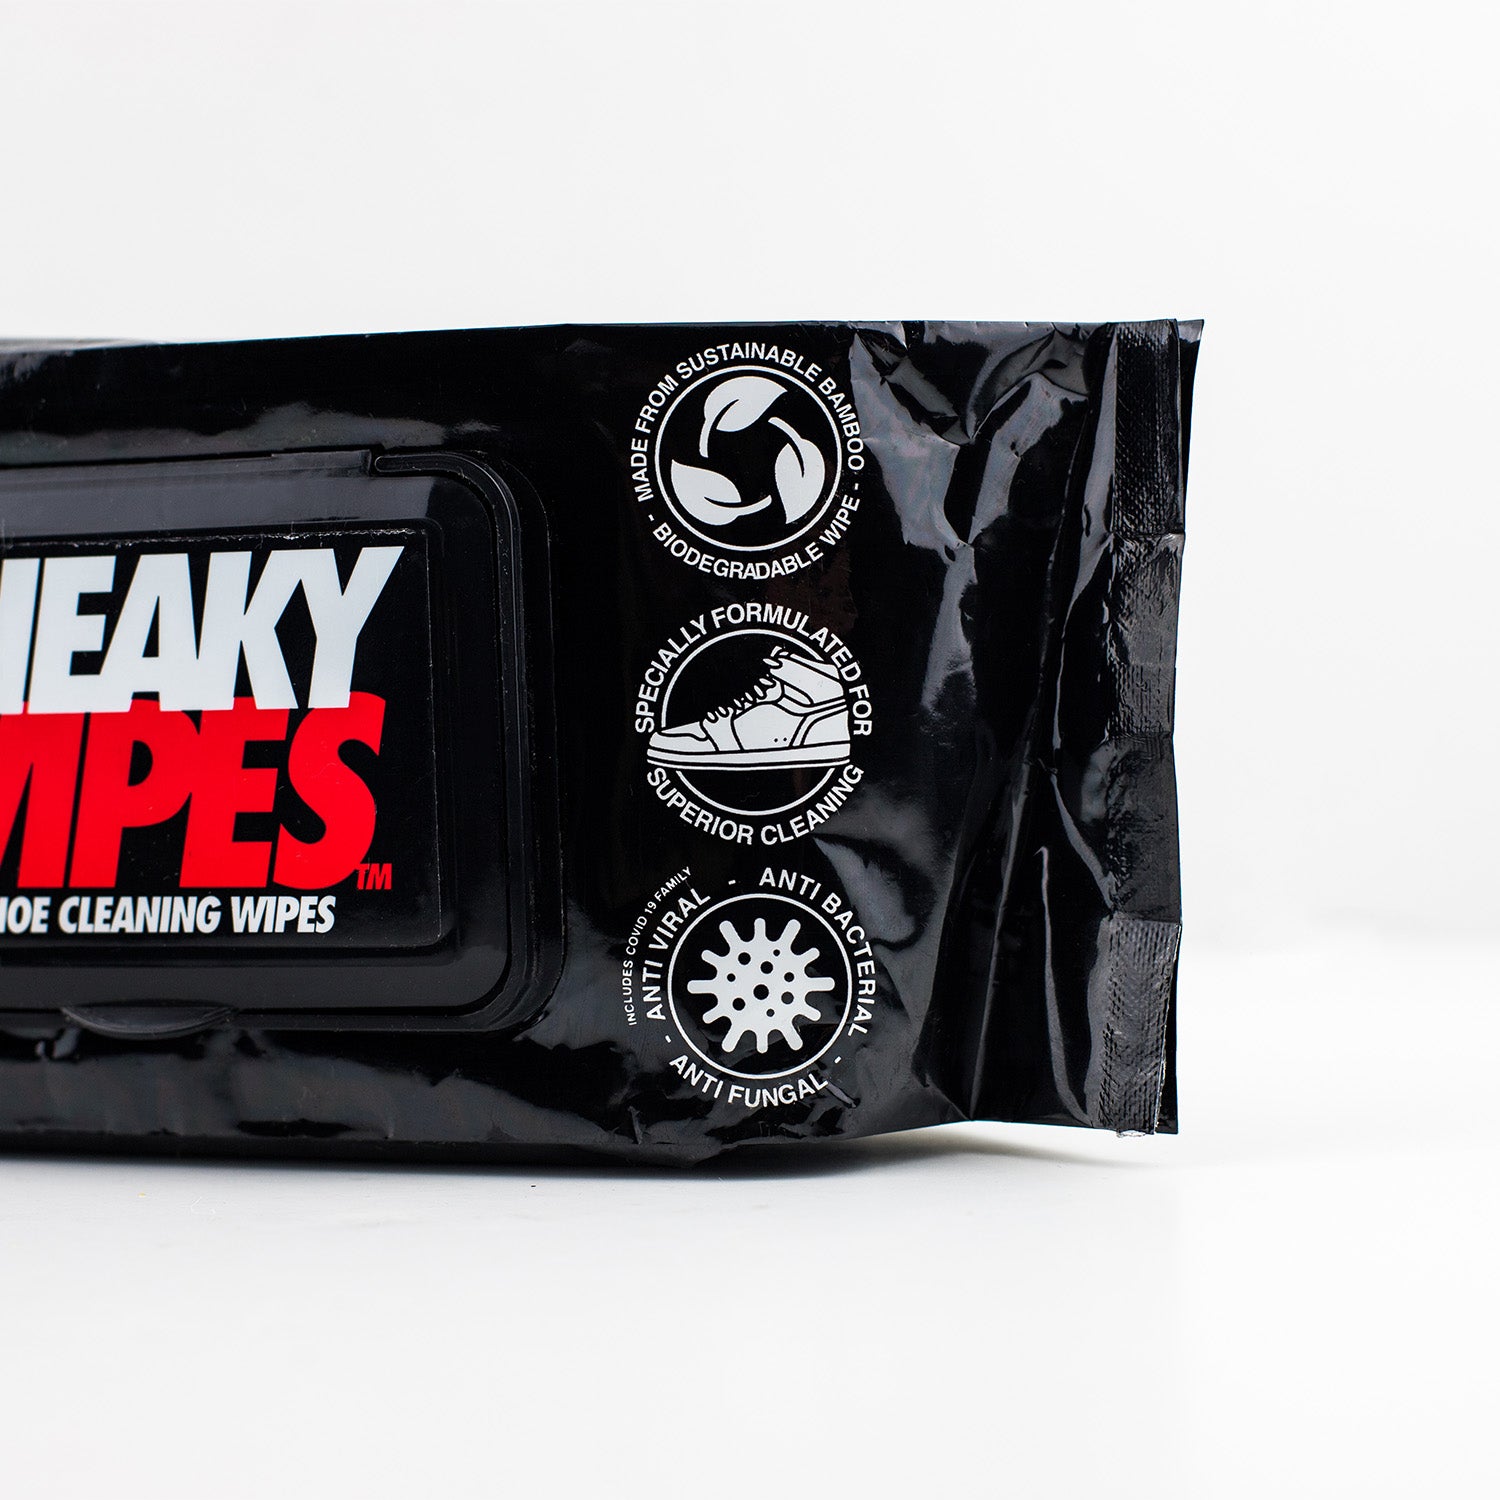 Sneaky Wipes - Shoe and Trainer Cleaning Wipes - 50 Mega Pack